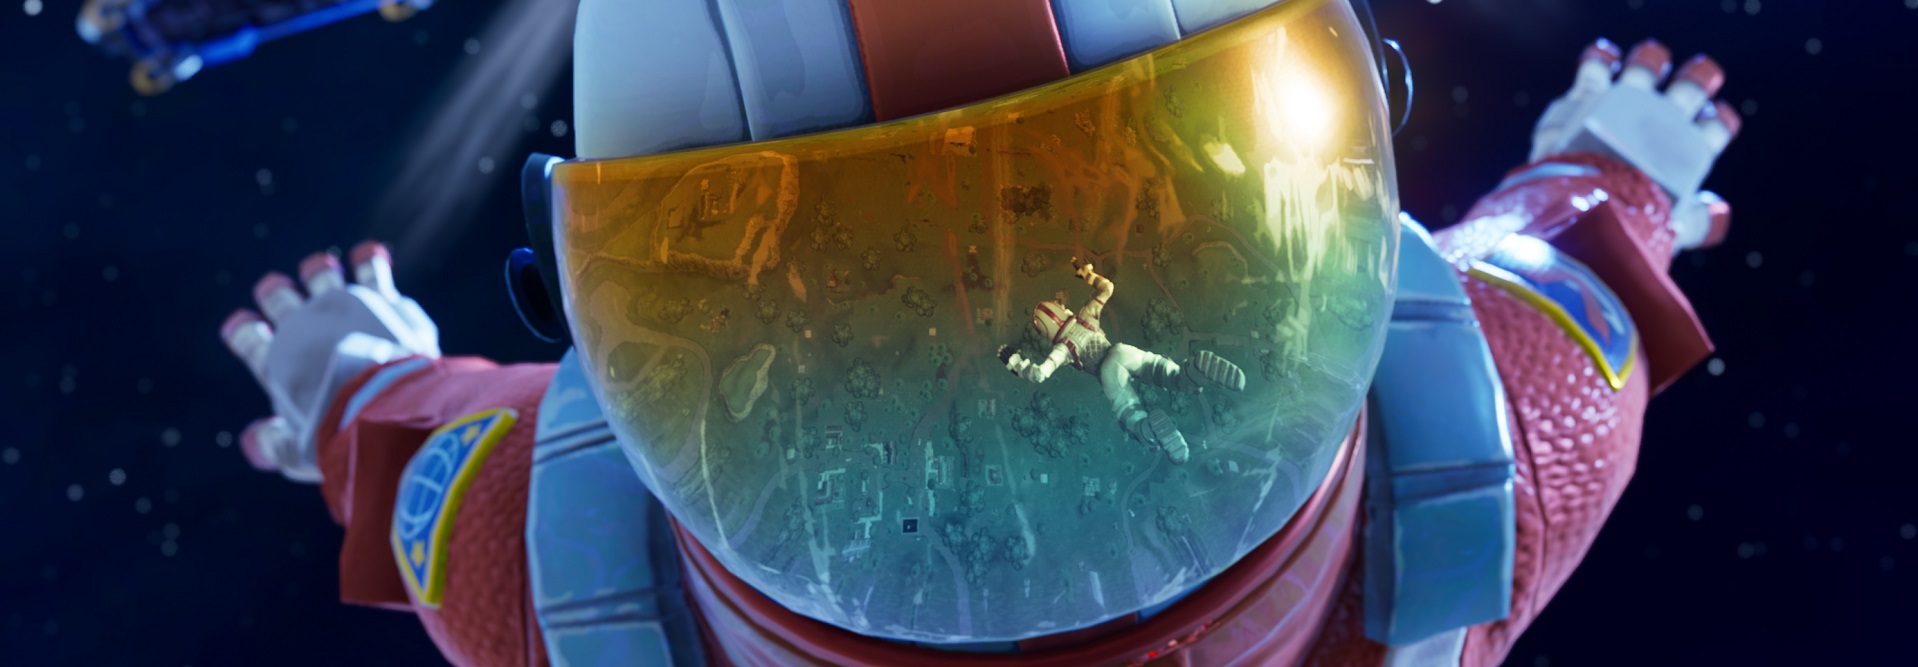 Fortnite Season Release Date And Battle Pass Details